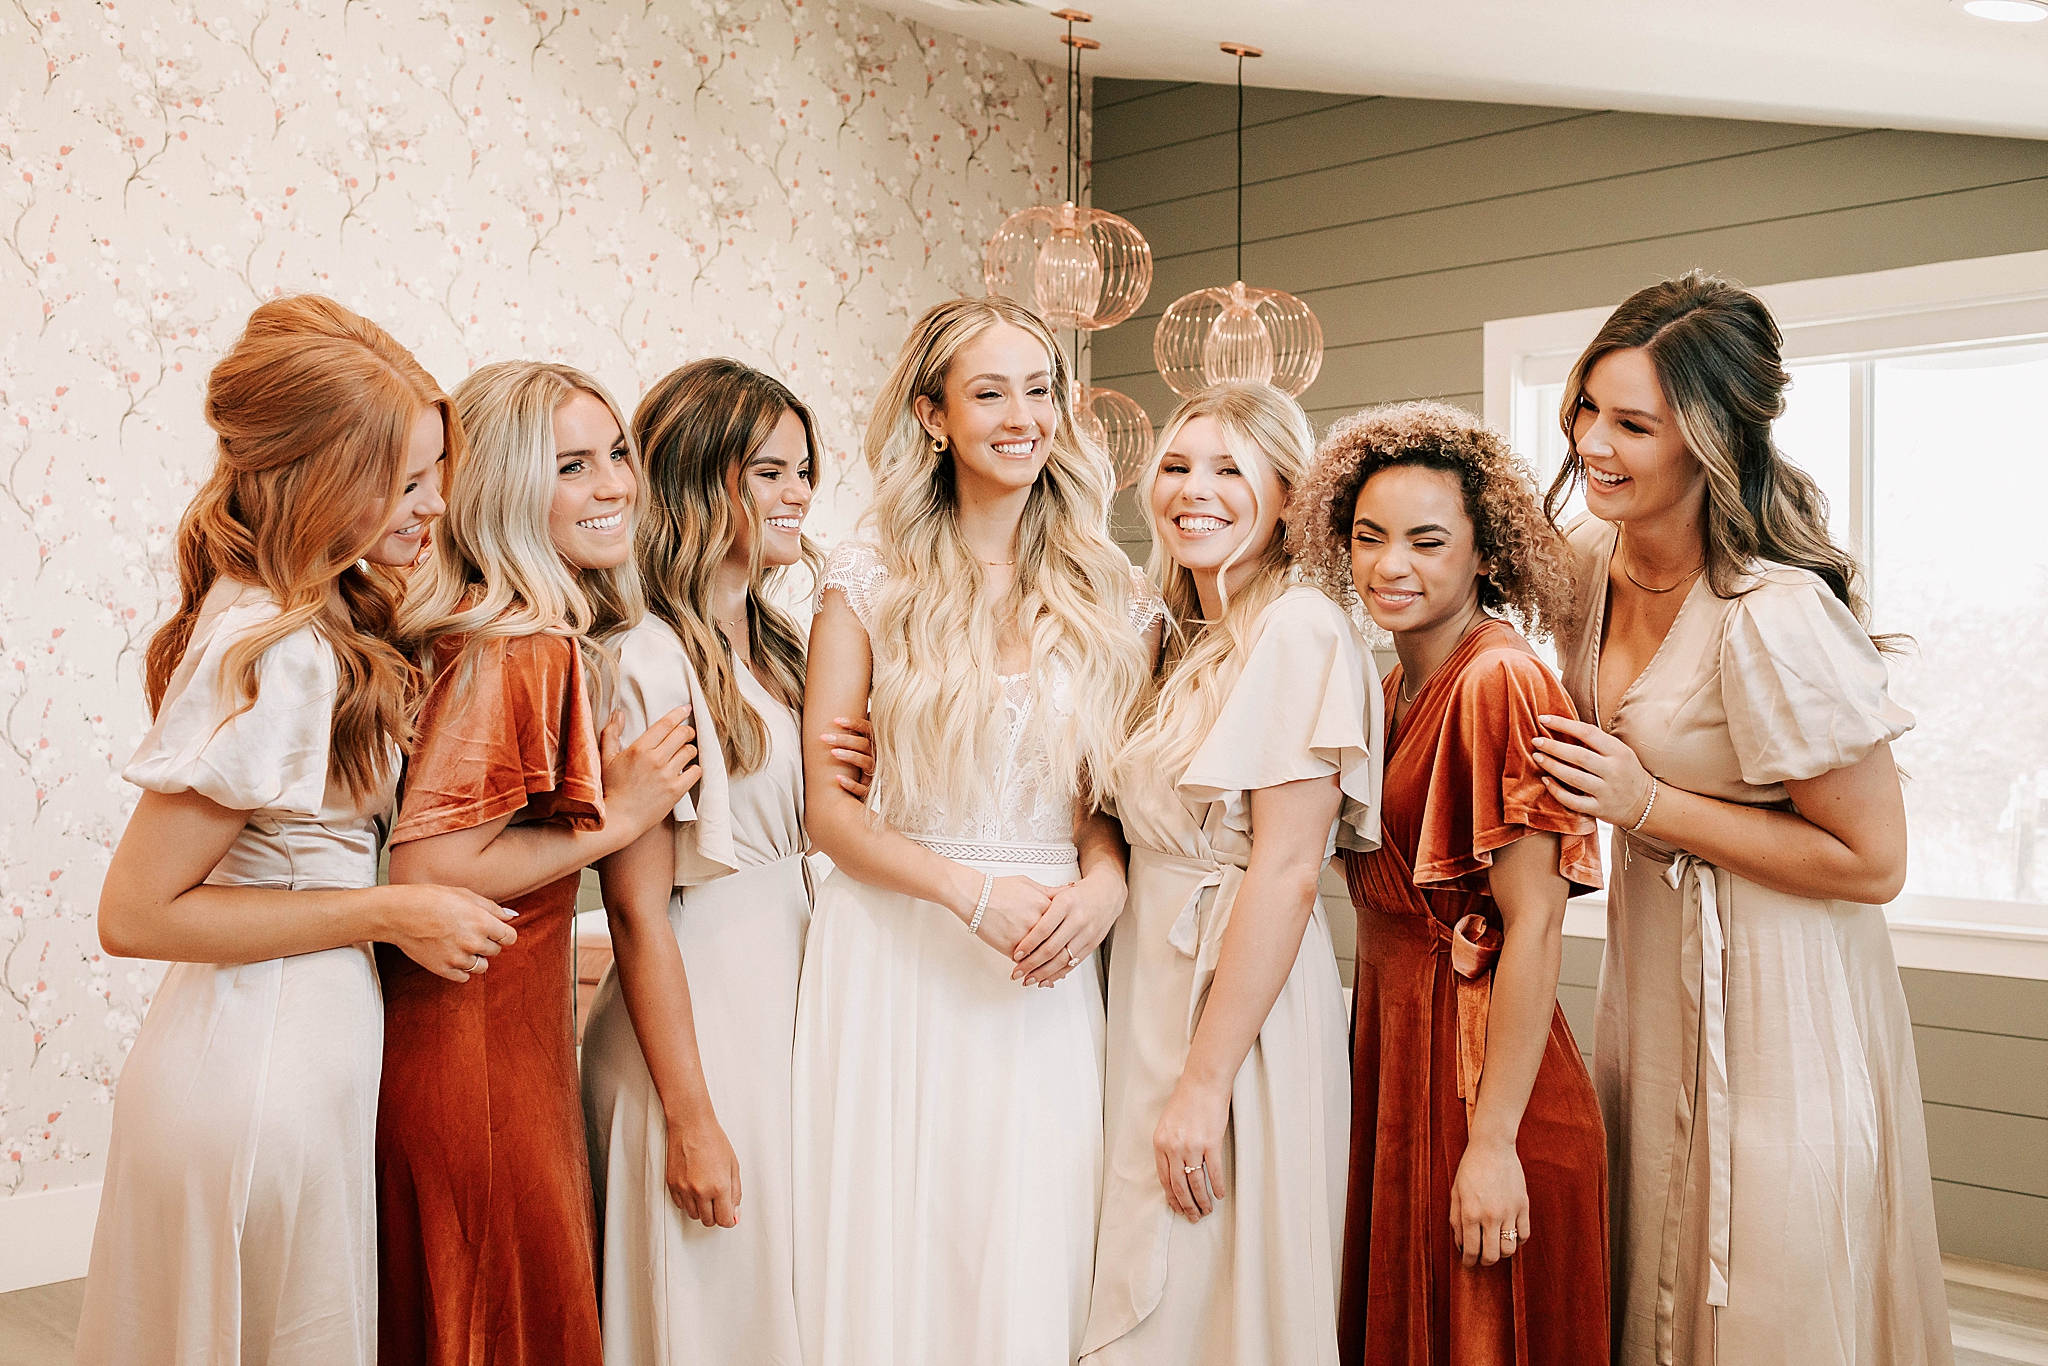 bridal party laughing together in bridal suite at jackson hole wedding venue taken by adrian wayment photo